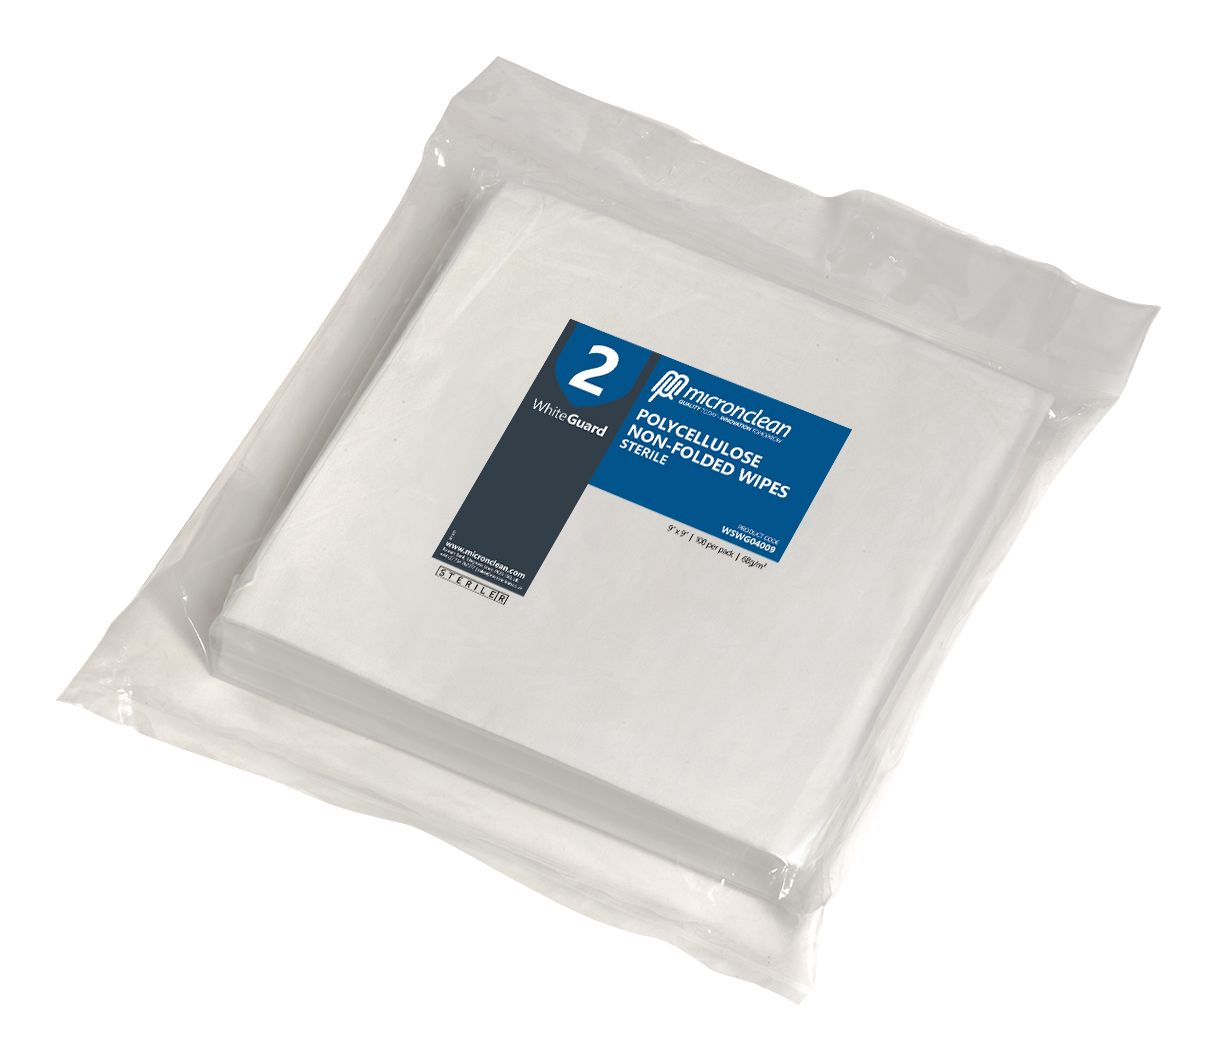 WhiteGuard 2 Polycellulose Wipes Sterile [IN]